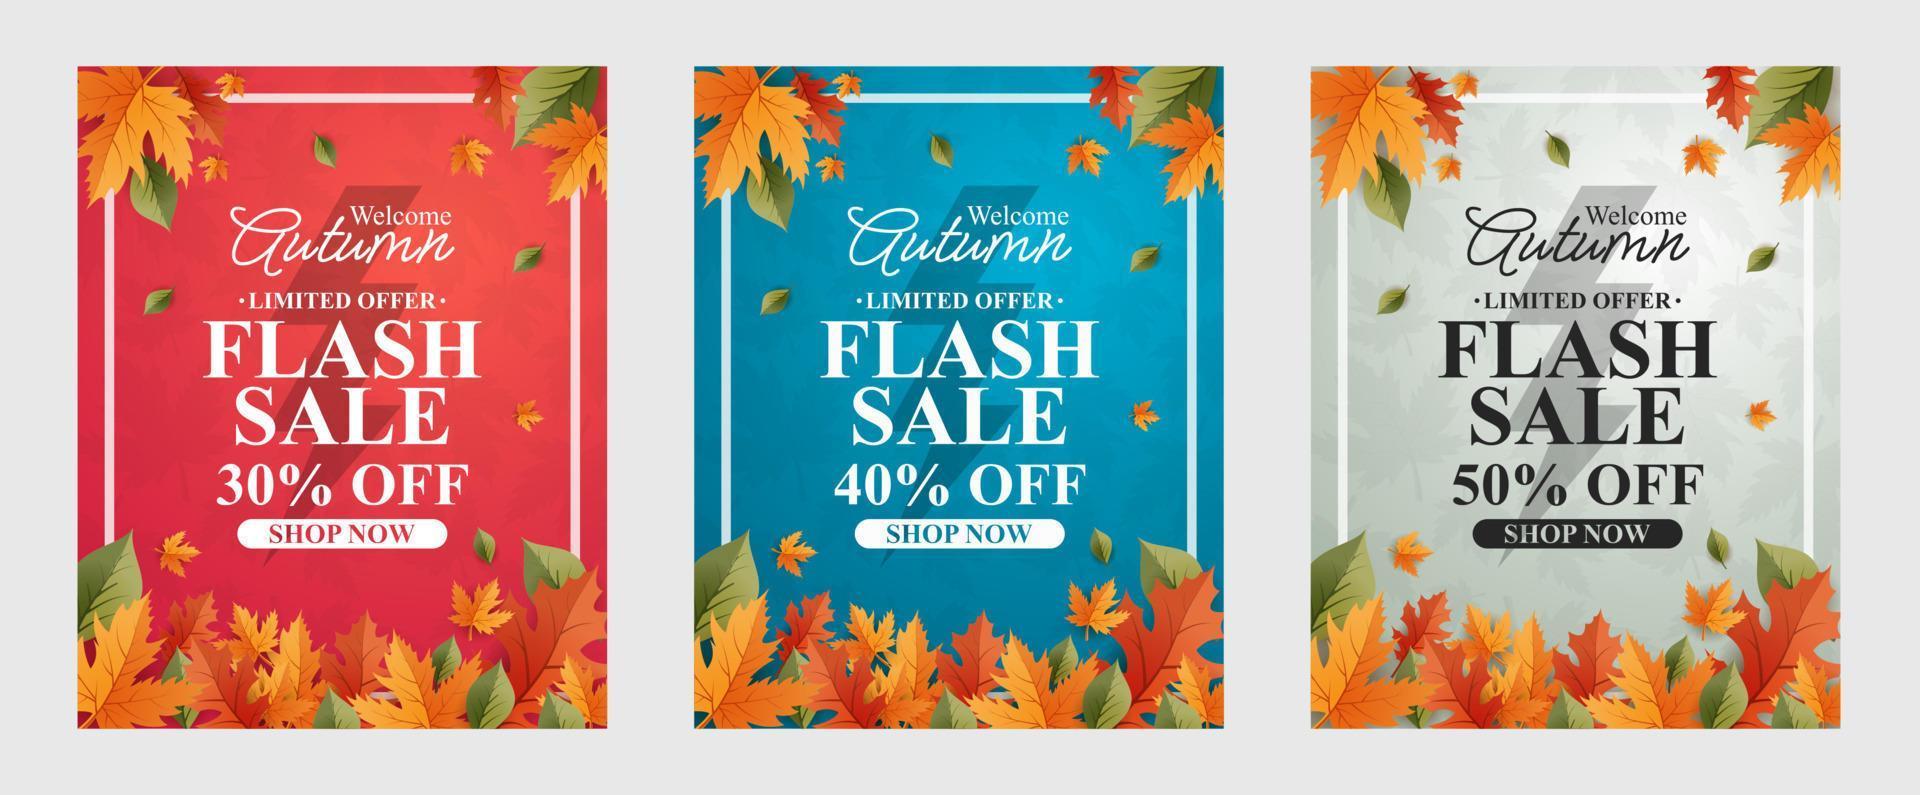 Autumn Sale Backgrounds with leaves, set happy autumn tempate, banner, posters, cover design templates, social media wallpaper stories vector